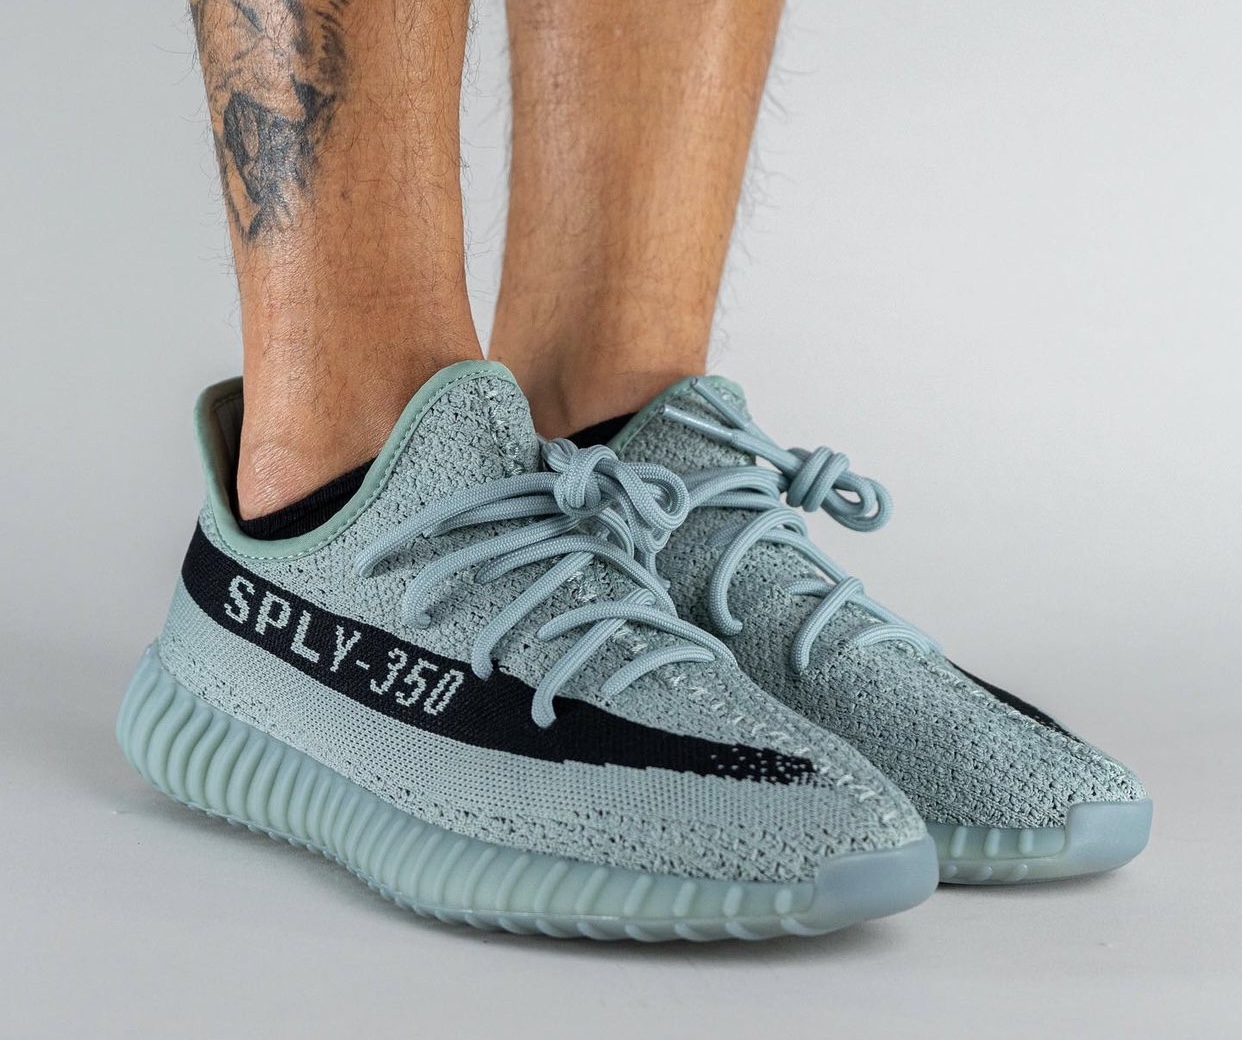 adidas Yeezy Boost 350 V2 Jade Ash HQ2060 Release Date On Feet